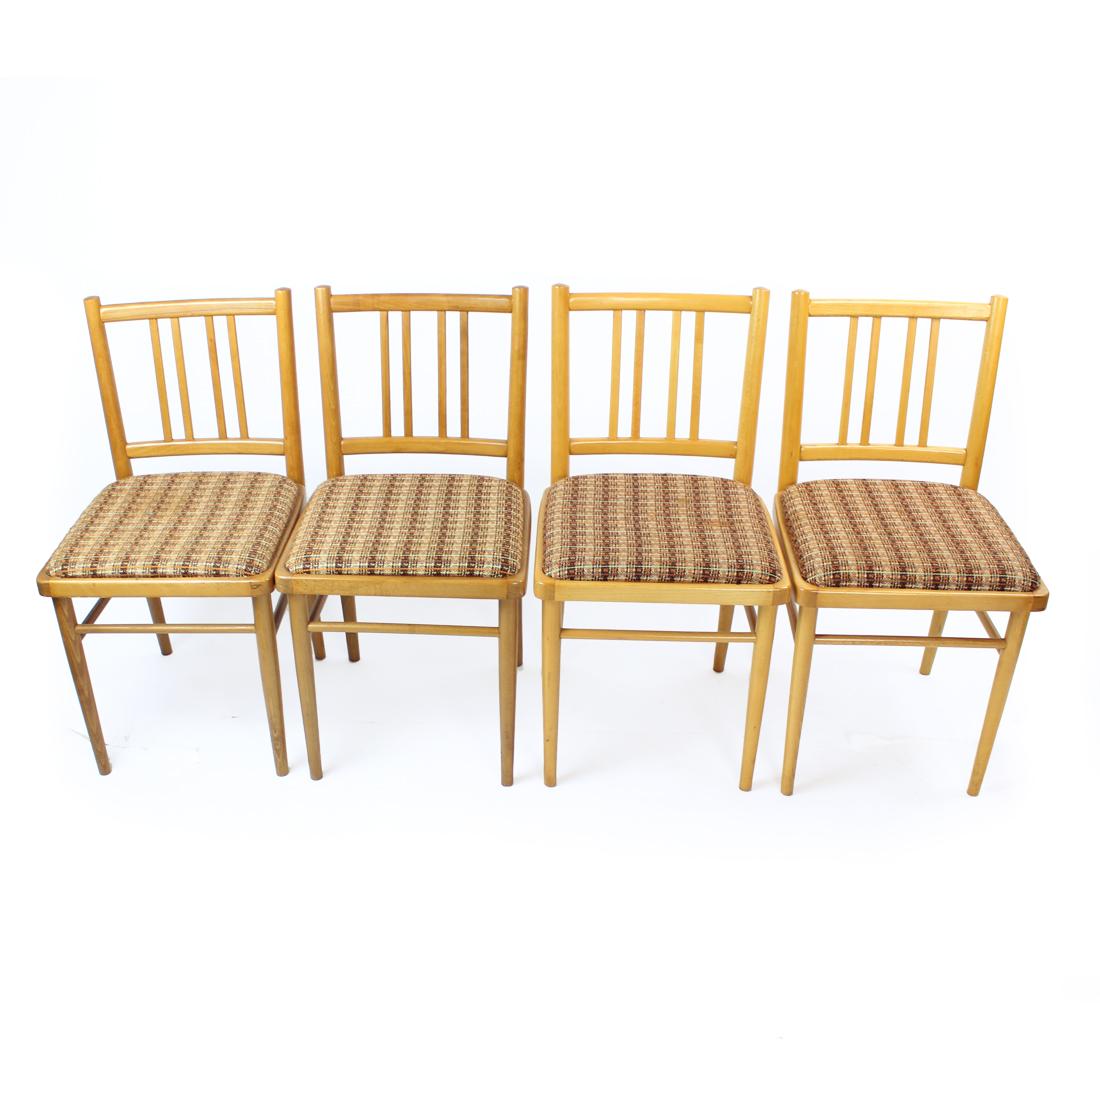 Midcentury Dining Chairs In Oak And Fabric, Ton Czechoslovakia, Set Of 4 For Sale 7